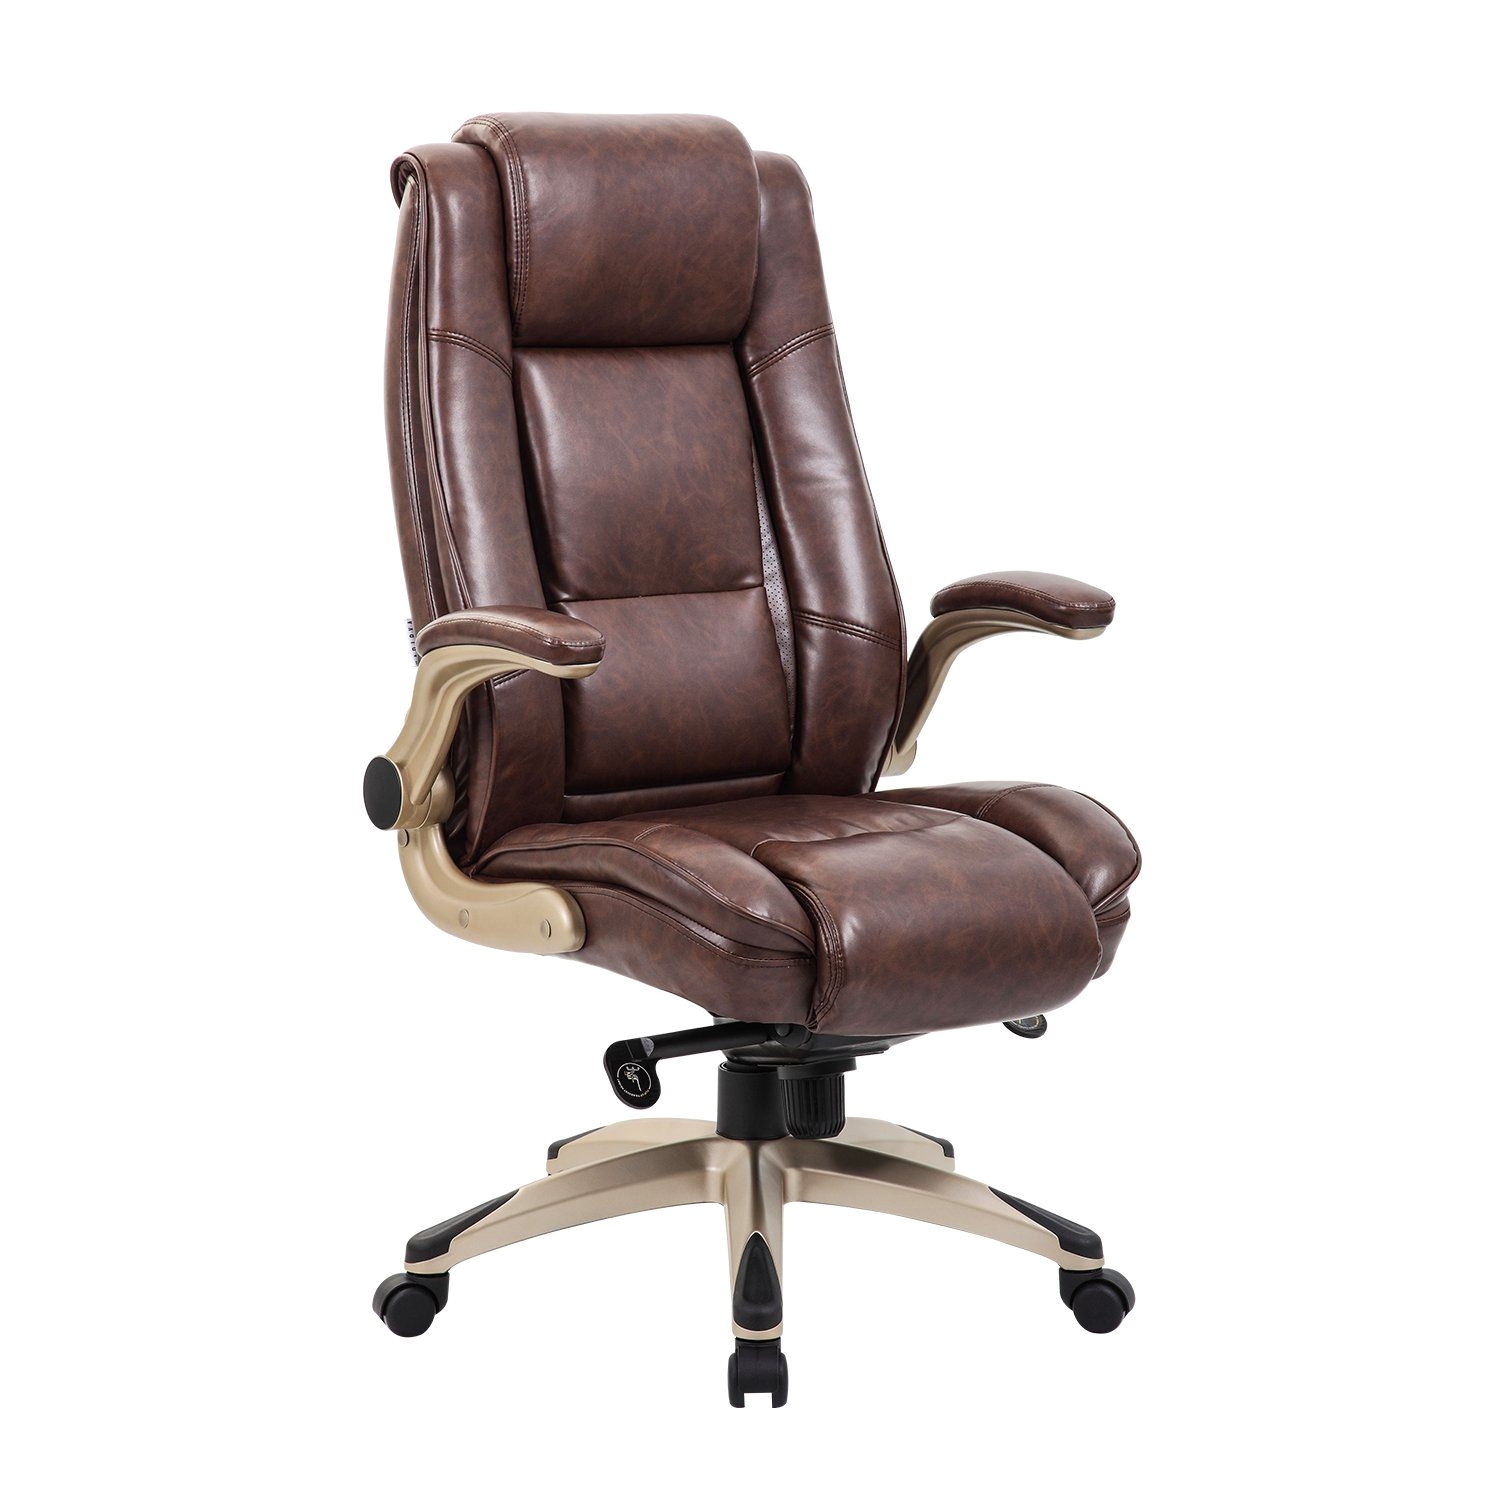 Motorized Office Chair Lch High Back Leather Office Chair Executive Computer Desk Chair